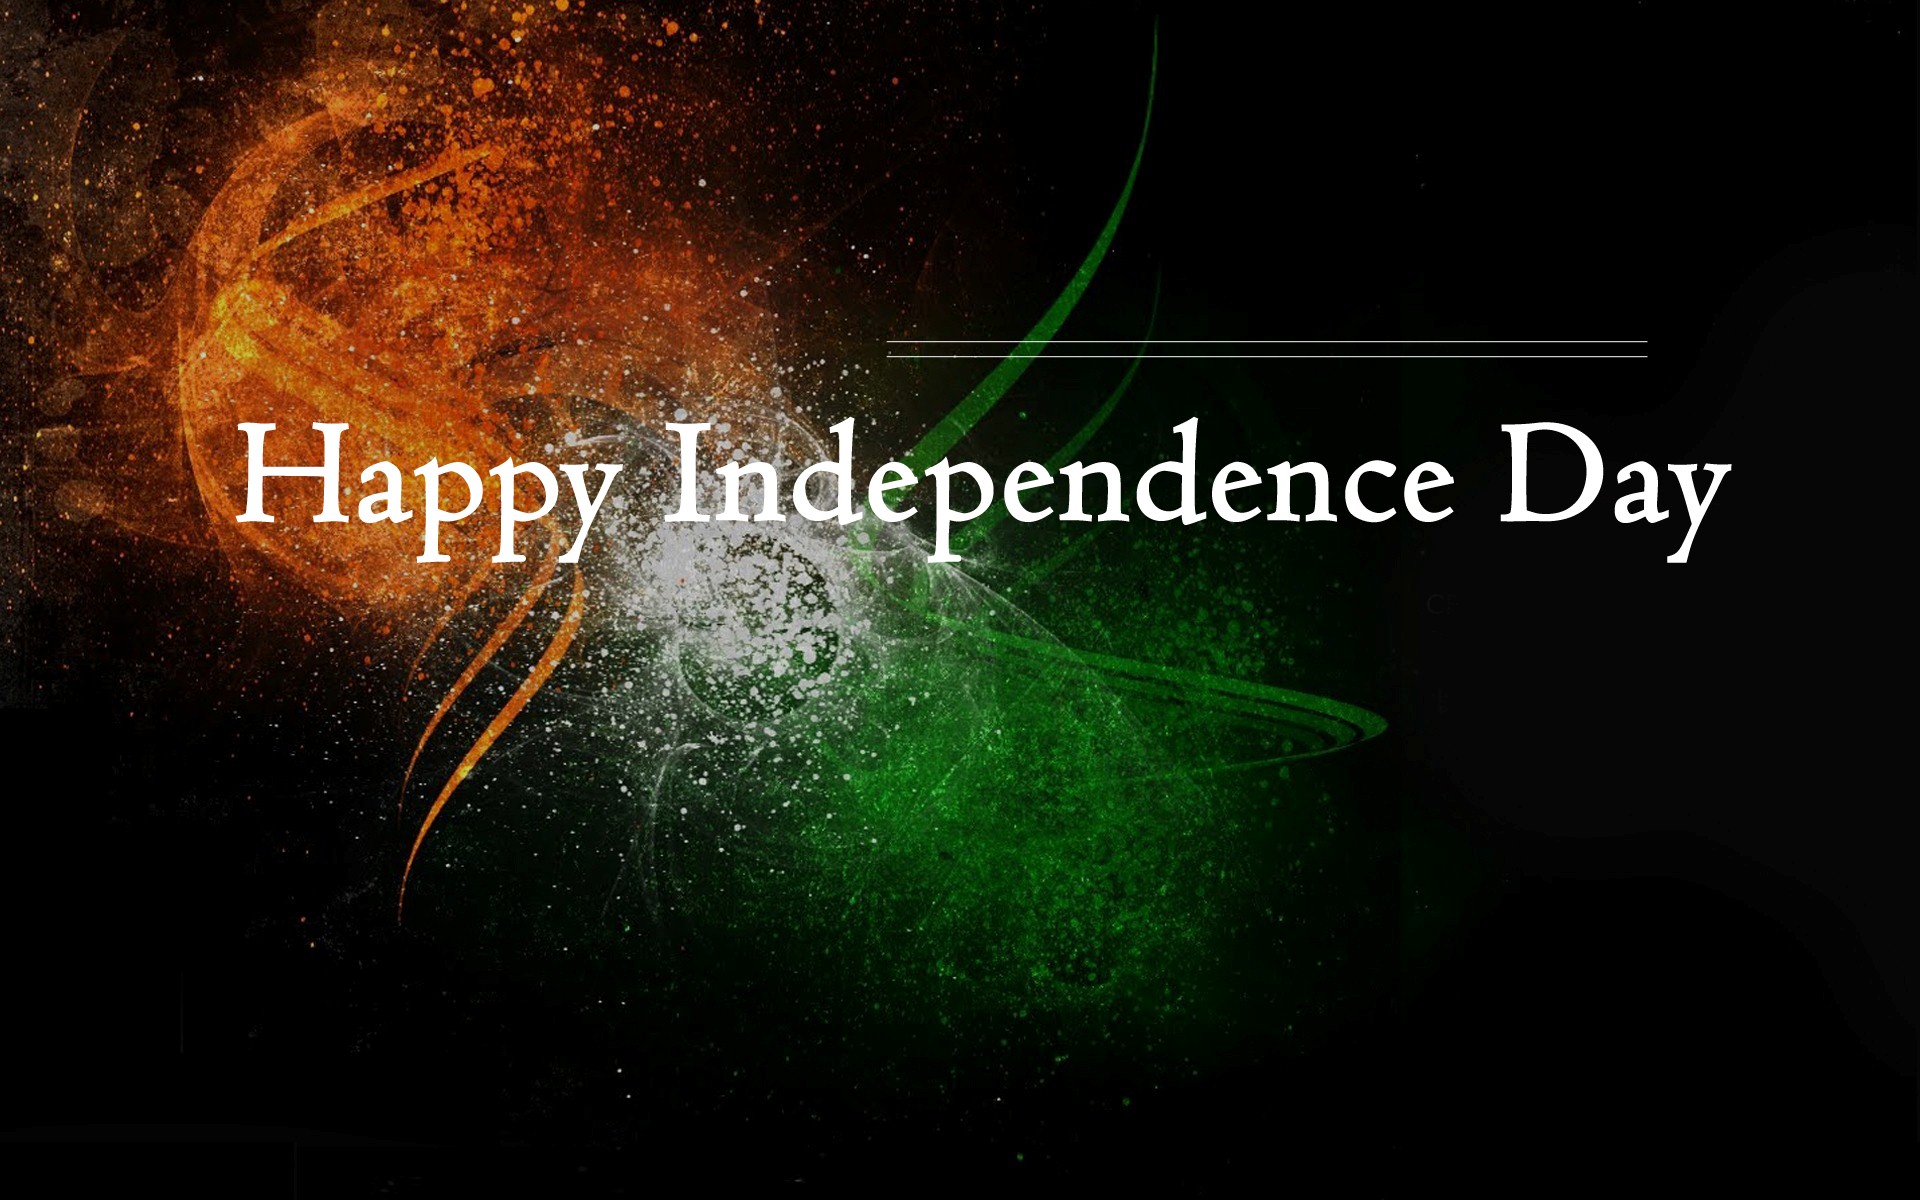 Happy Independence Day Desktop Image Background - Independence Day Of India - HD Wallpaper 